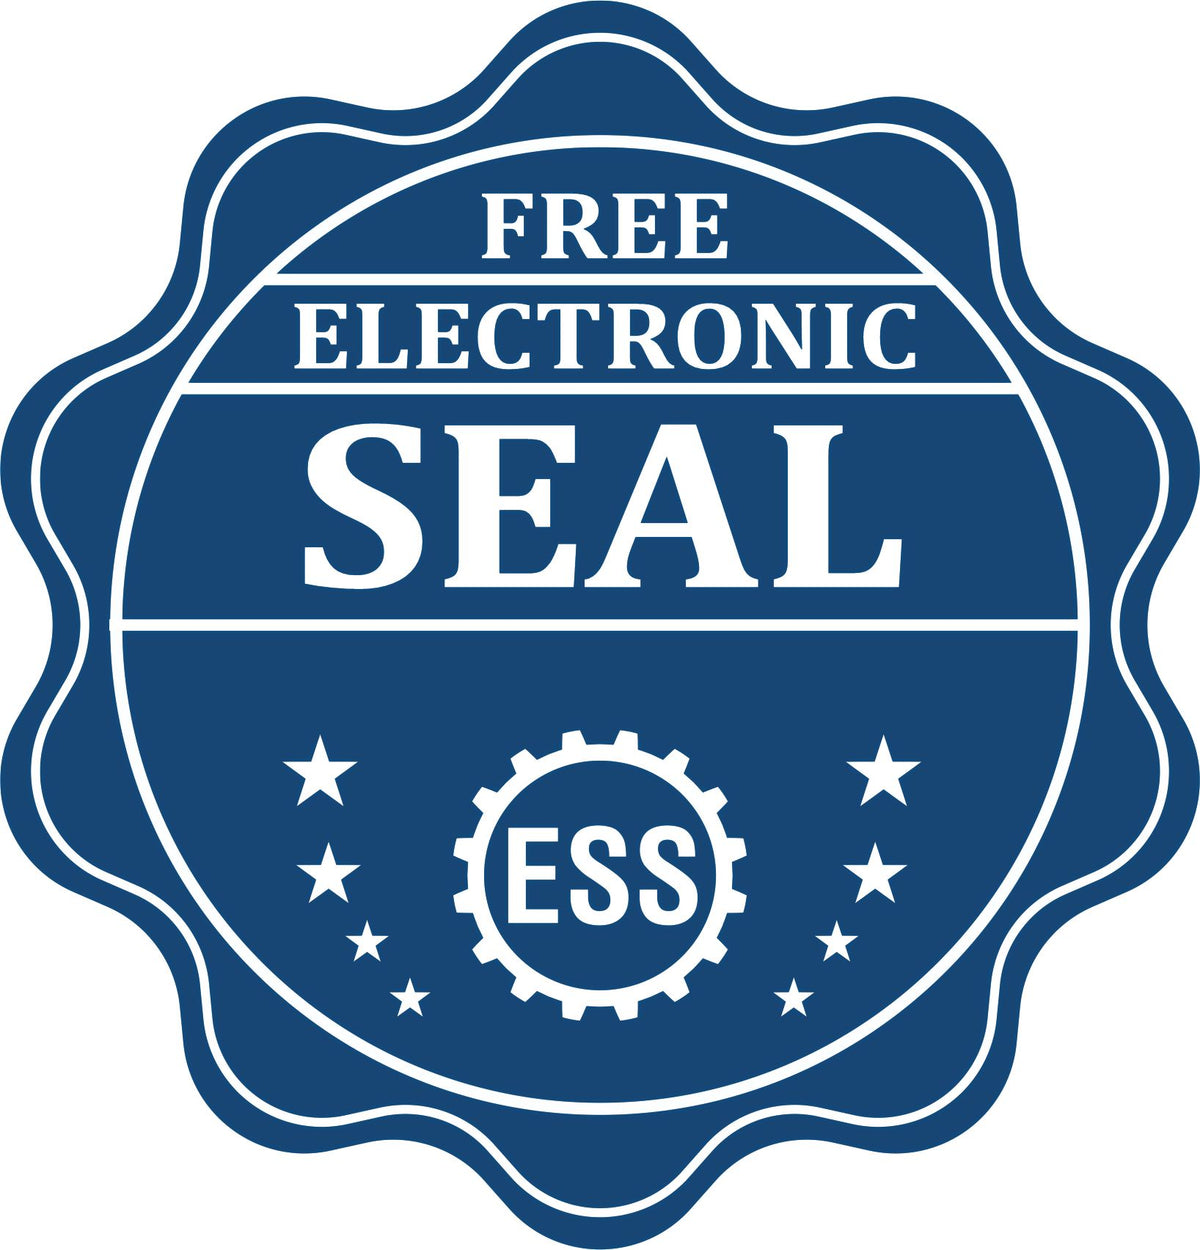 A badge showing a free electronic seal for the State of New Mexico Extended Long Reach Geologist Seal with stars and the ESS gear on the emblem.